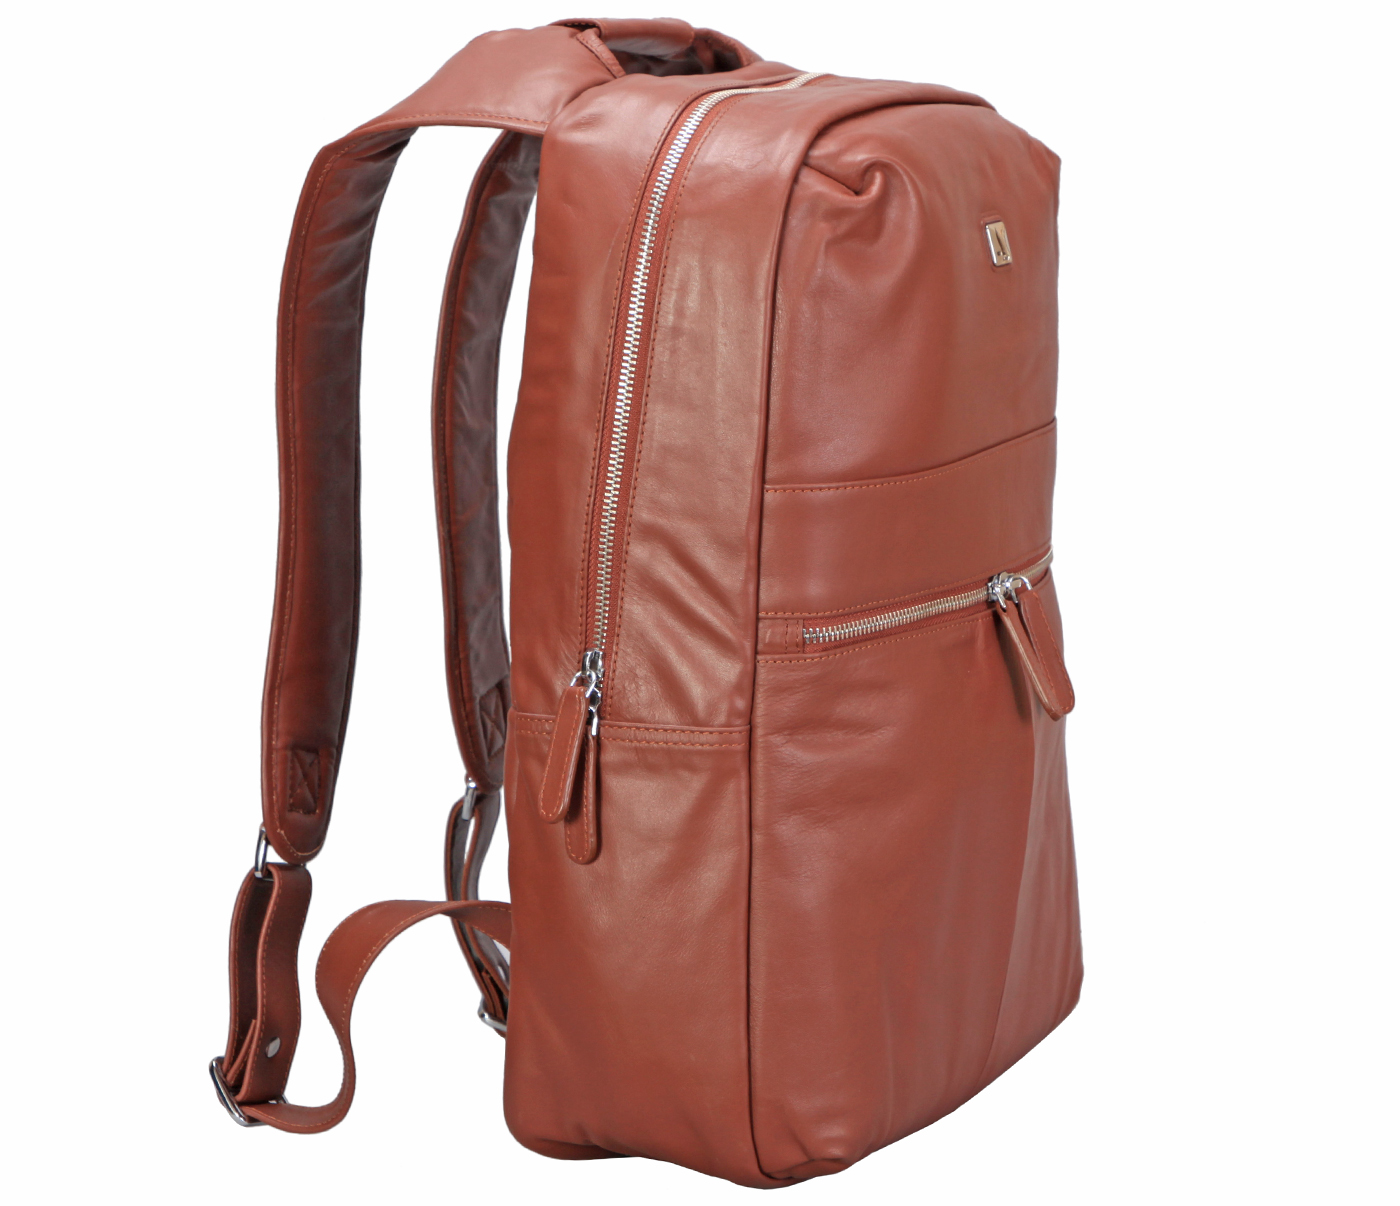 LC40-Charles-Unisex Backpack For Laptop Bag In Genuine Leather  - Tan